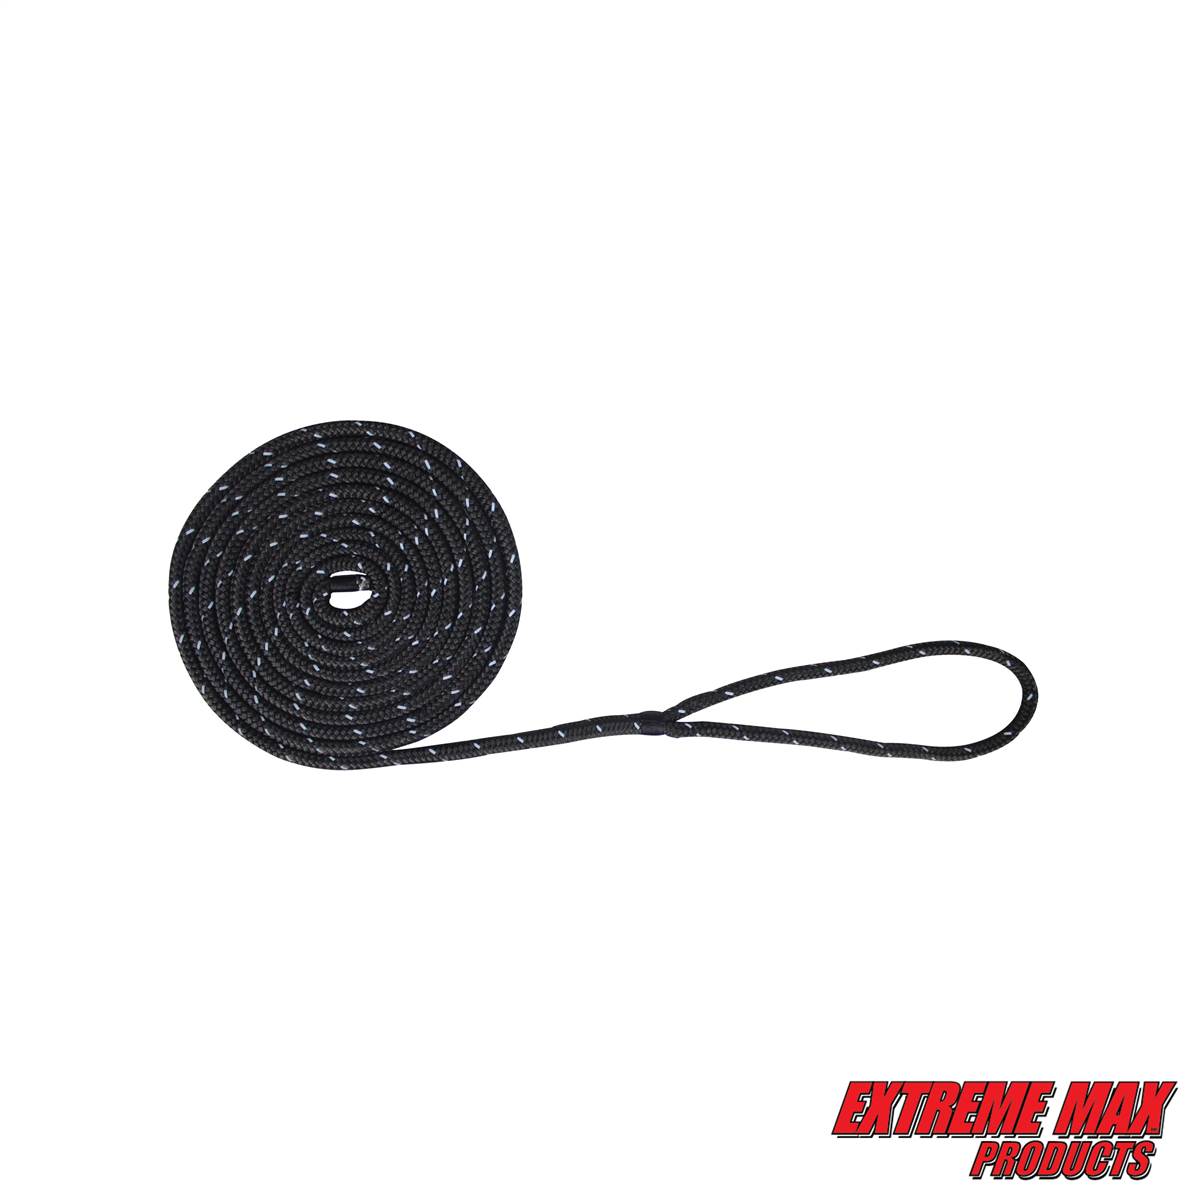 Extreme Max 3006.2463 BoatTector Double Braid Nylon Dock Line 3/8 x 15 Black w/ Reflective Tracer